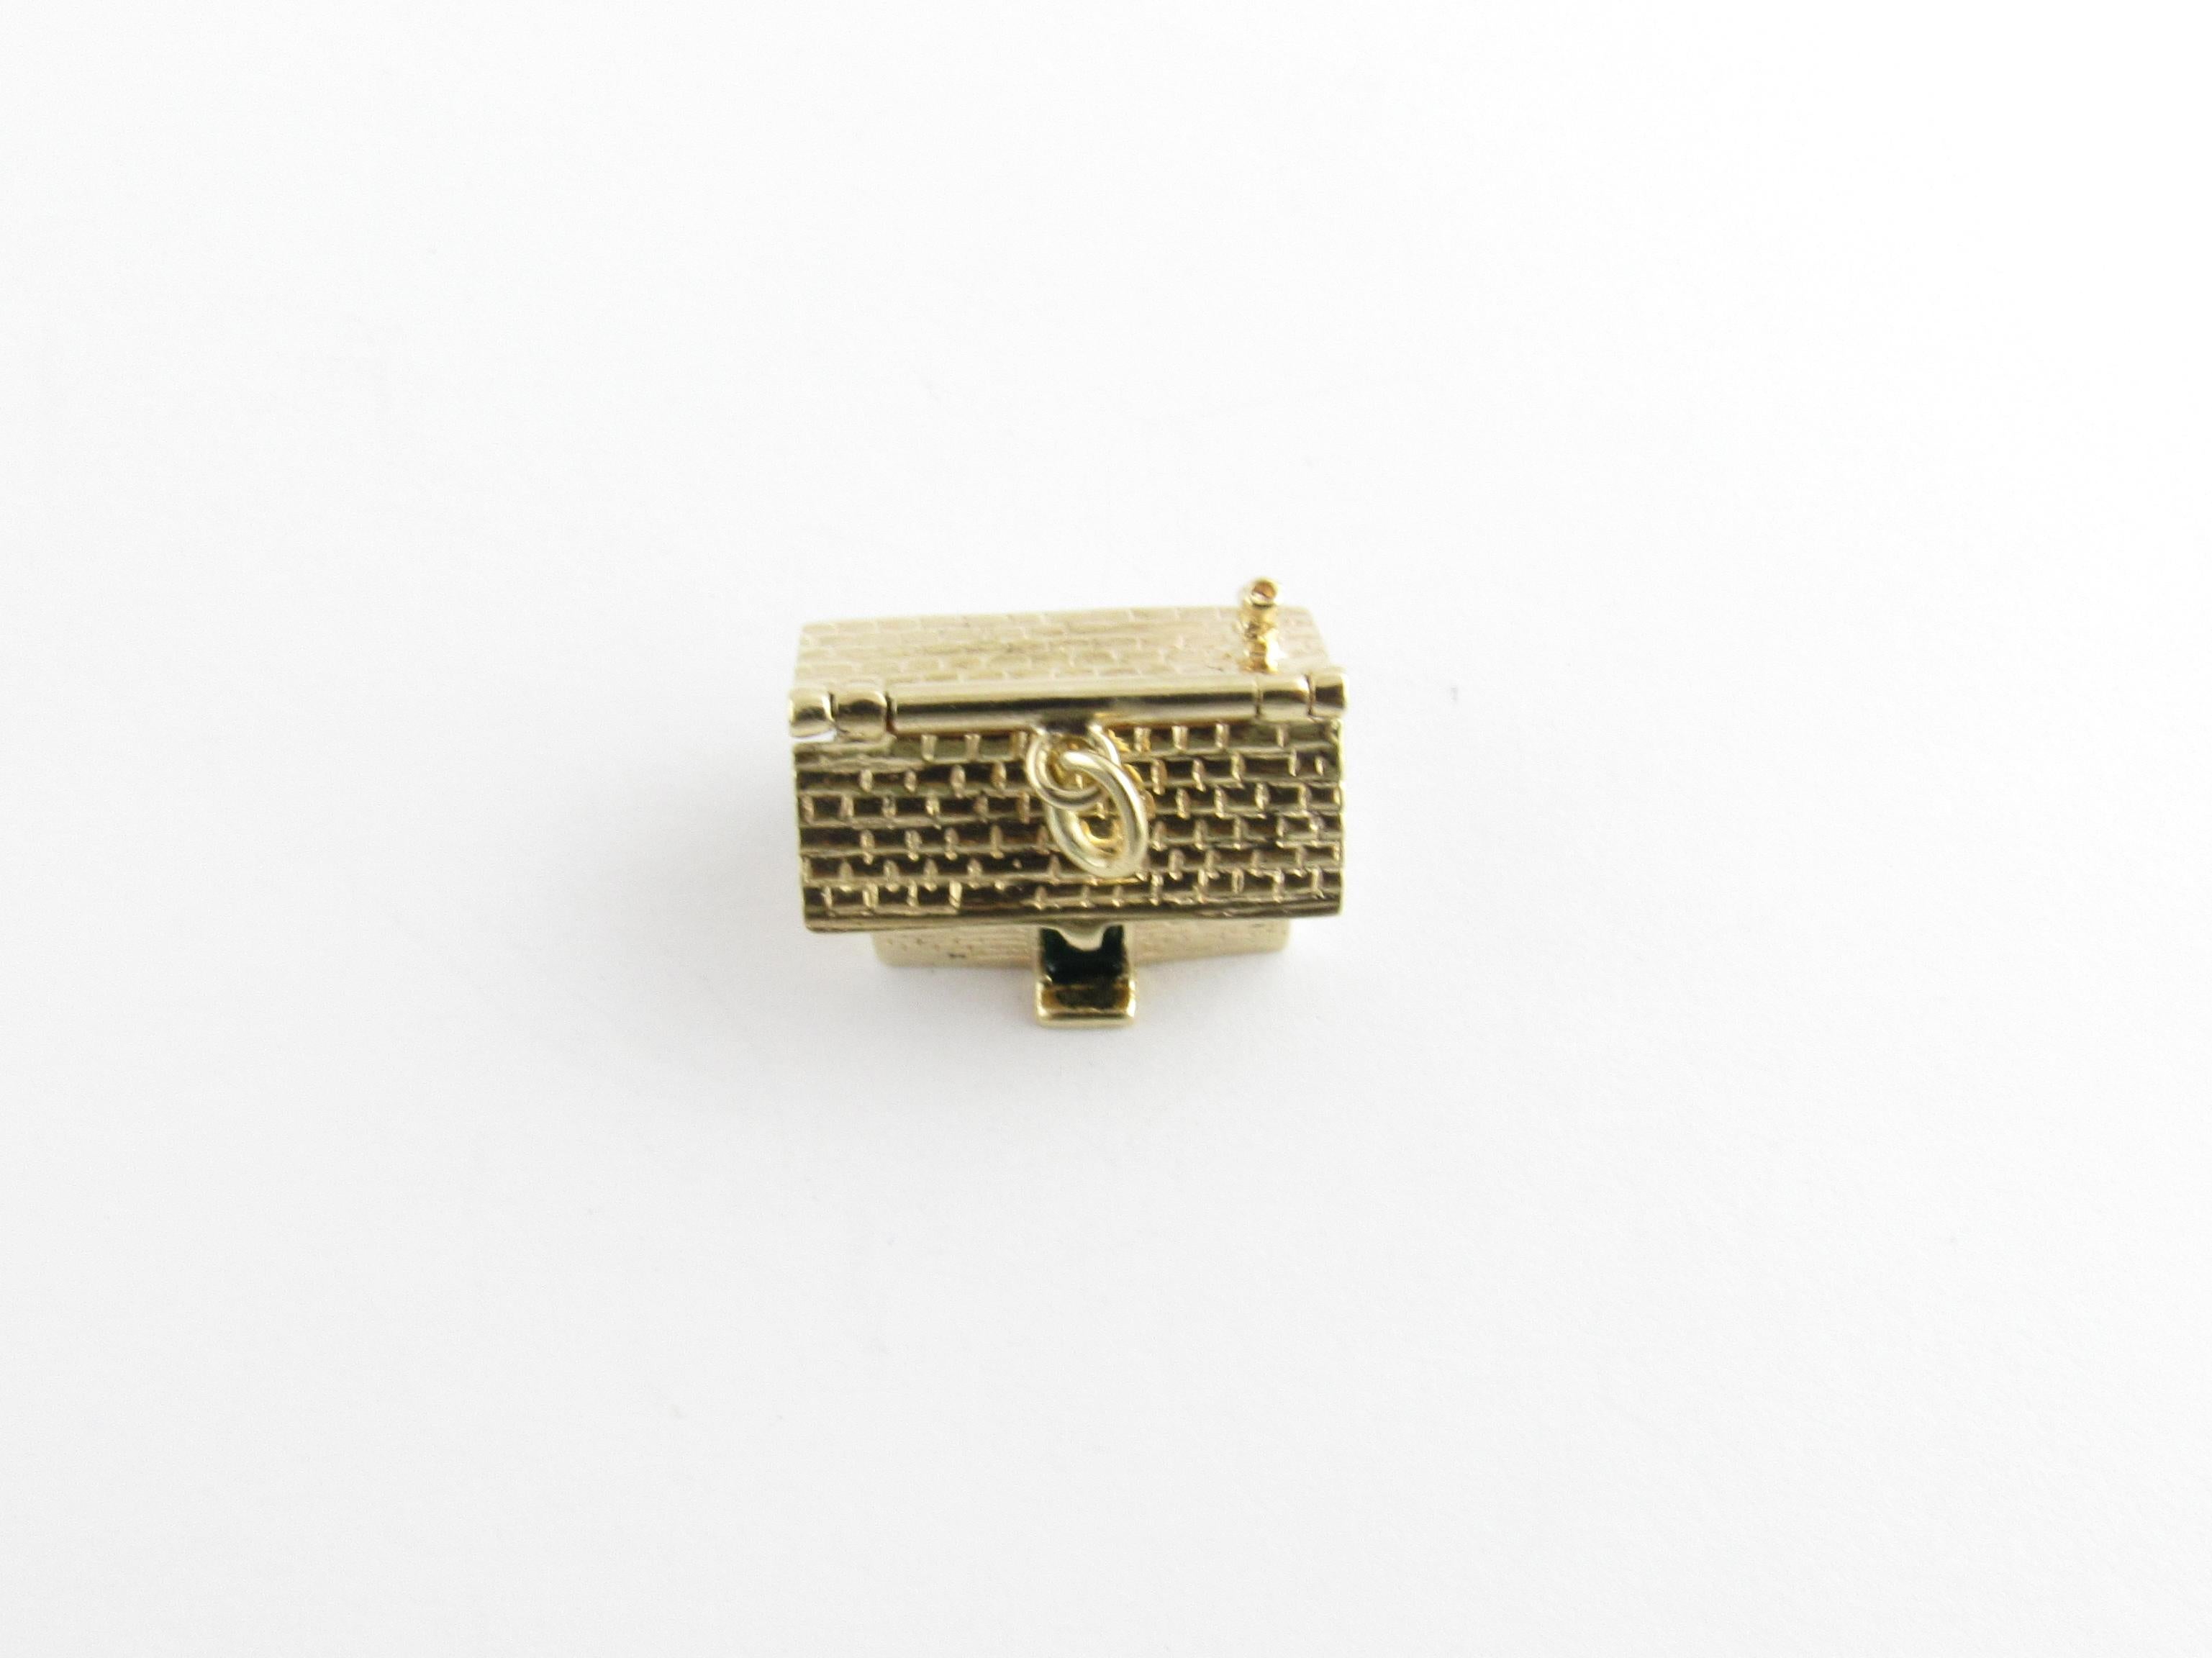 Vintage 14 Karat Yellow Gold Articulated House Charm

Home sweet home!

This lovely articulated charm features a 3D house with hinged roof that opens to reveal a miniature table and chairs! Meticulously detailed in 14K yellow gold.

Size: 14 mm x 18